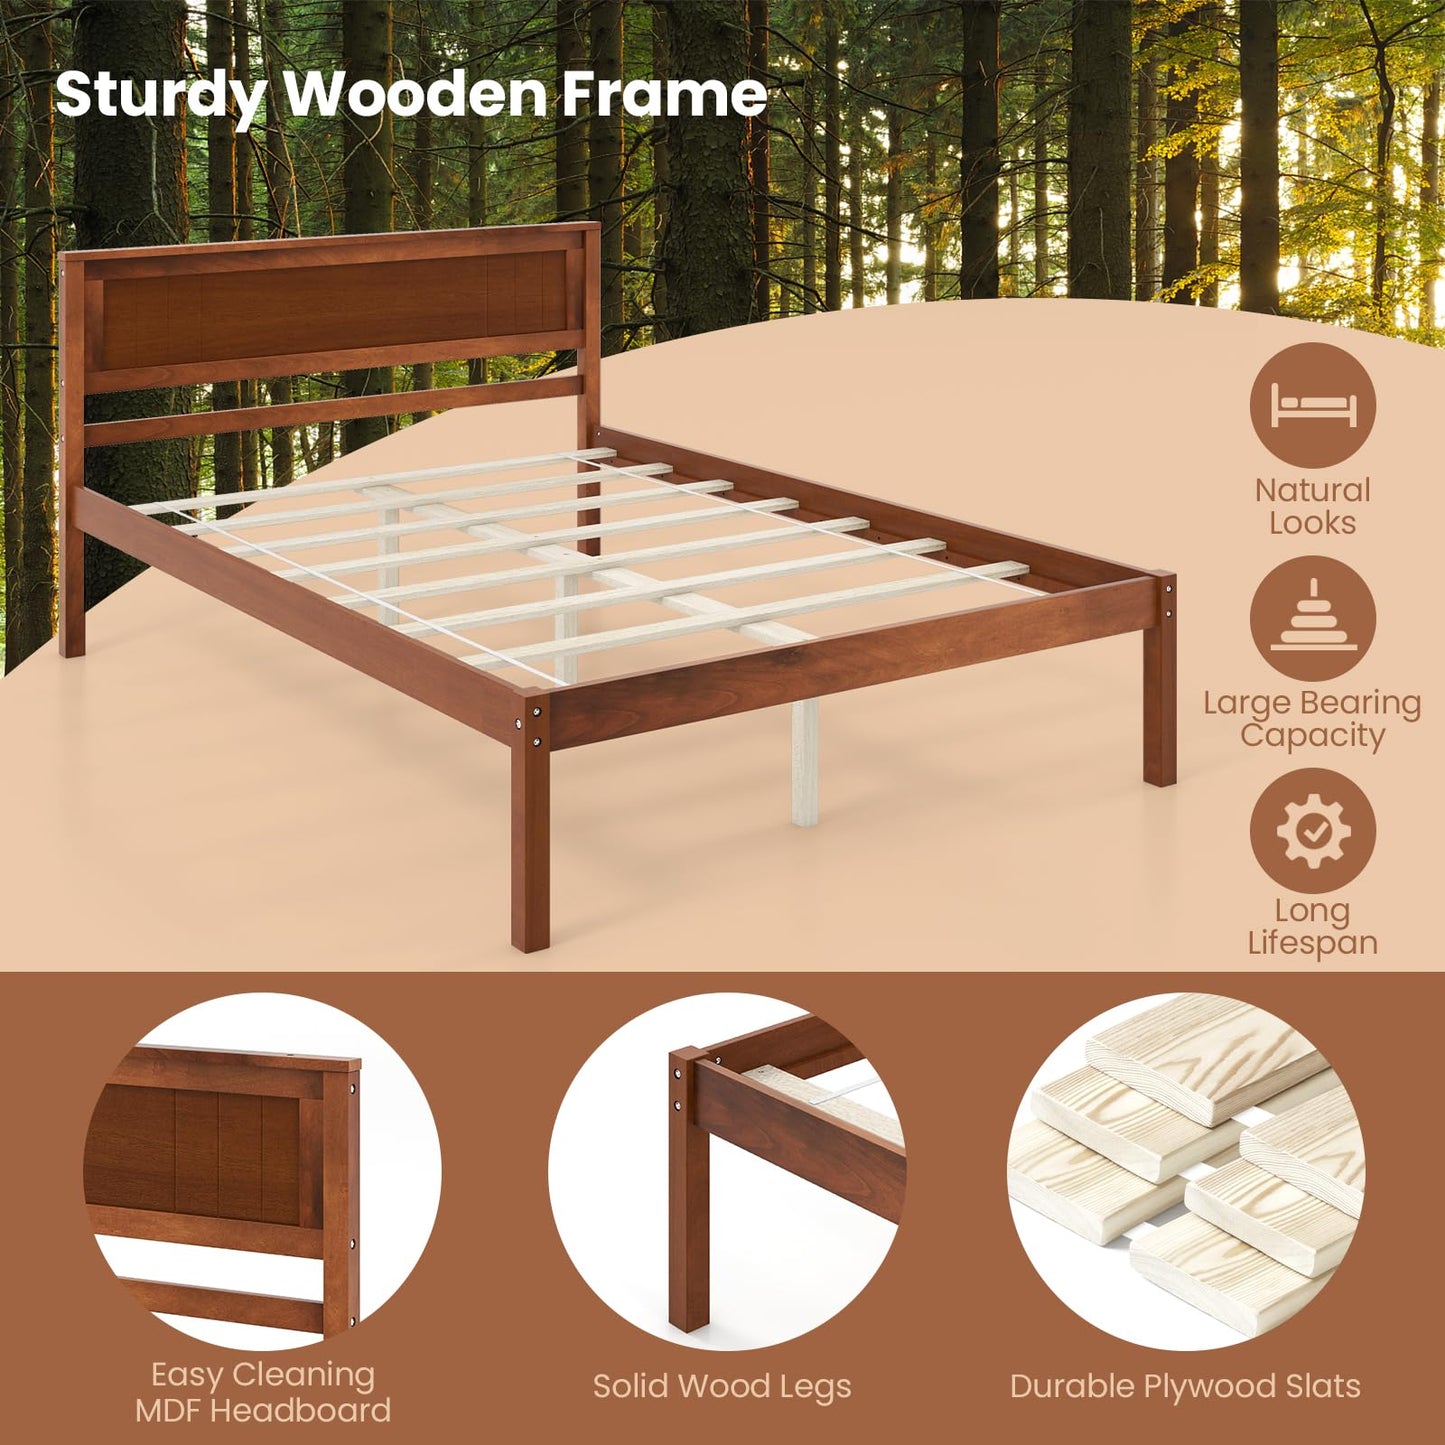 Giantex Wood Full Platform Bed with Headboard, Mid Century Solid Wood Bed Frame with Wood Slat Support, Wooden Mattress Foundation with 12" Under Bed